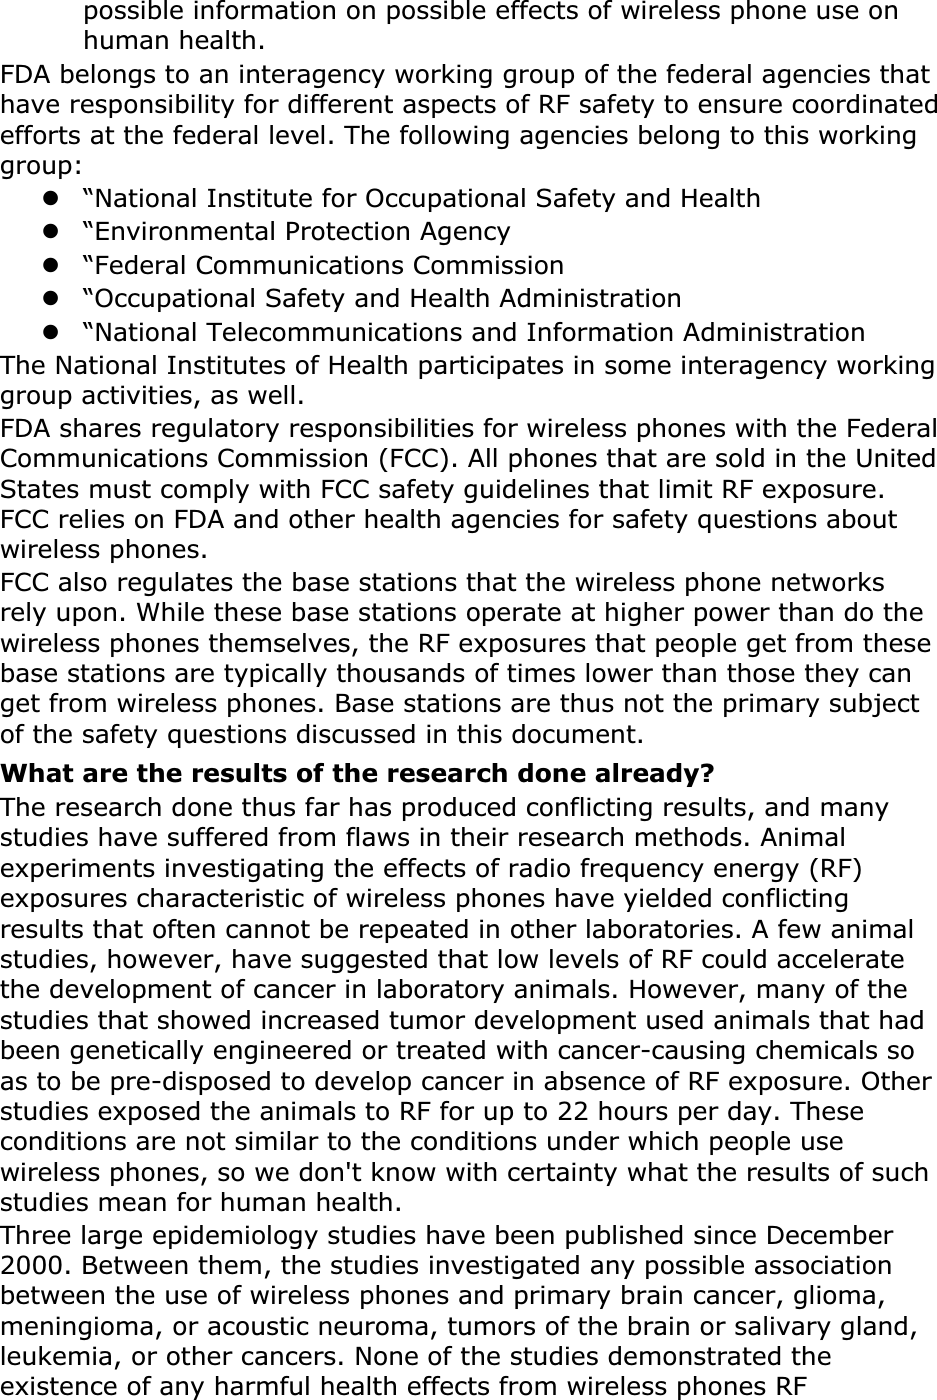 possible information on possible effects of wireless phone use on human health.FDA belongs to an interagency working group of the federal agencies that have responsibility for different aspects of RF safety to ensure coordinated efforts at the federal level. The following agencies belong to this working group:z“National Institute for Occupational Safety and Healthz“Environmental Protection Agencyz“Federal Communications Commissionz“Occupational Safety and Health Administrationz“National Telecommunications and Information AdministrationThe National Institutes of Health participates in some interagency working group activities, as well.FDA shares regulatory responsibilities for wireless phones with the Federal Communications Commission (FCC). All phones that are sold in the United States must comply with FCC safety guidelines that limit RF exposure. FCC relies on FDA and other health agencies for safety questions about wireless phones.FCC also regulates the base stations that the wireless phone networks rely upon. While these base stations operate at higher power than do the wireless phones themselves, the RF exposures that people get from these base stations are typically thousands of times lower than those they can get from wireless phones. Base stations are thus not the primary subject of the safety questions discussed in this document.What are the results of the research done already?The research done thus far has produced conflicting results, and many studies have suffered from flaws in their research methods. Animal experiments investigating the effects of radio frequency energy (RF) exposures characteristic of wireless phones have yielded conflicting results that often cannot be repeated in other laboratories. A few animal studies, however, have suggested that low levels of RF could accelerate the development of cancer in laboratory animals. However, many of the studies that showed increased tumor development used animals that had been genetically engineered or treated with cancer-causing chemicals so as to be pre-disposed to develop cancer in absence of RF exposure. Other studies exposed the animals to RF for up to 22 hours per day. These conditions are not similar to the conditions under which people use wireless phones, so we don&apos;t know with certainty what the results of such studies mean for human health.Three large epidemiology studies have been published since December 2000. Between them, the studies investigated any possible association between the use of wireless phones and primary brain cancer, glioma, meningioma, or acoustic neuroma, tumors of the brain or salivary gland, leukemia, or other cancers. None of the studies demonstrated the existence of any harmful health effects from wireless phones RF 